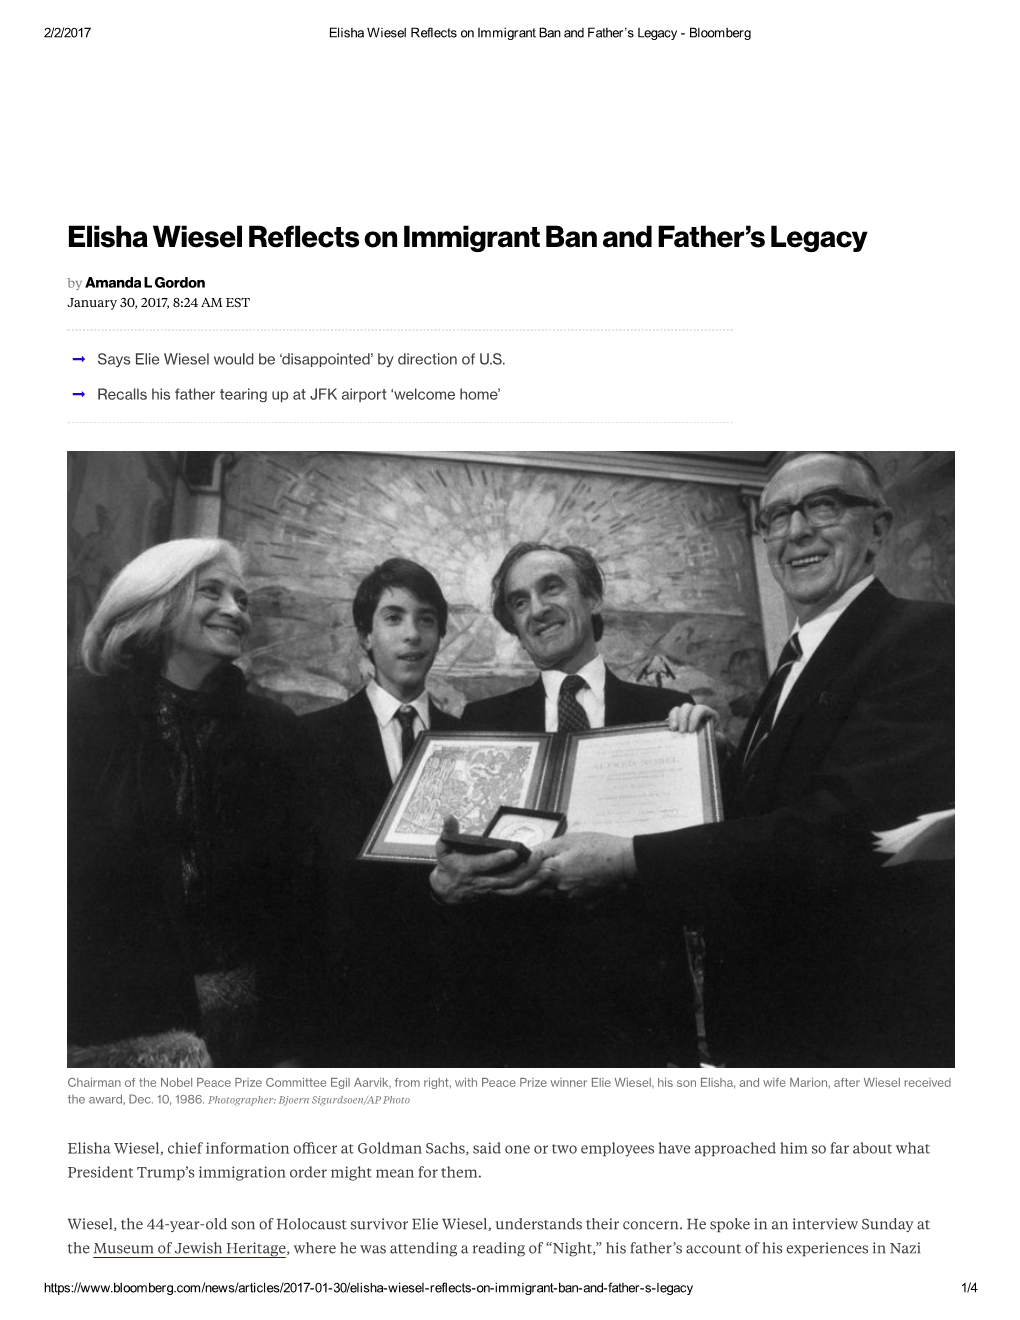 Elisha Wiesel Reflects on Immigrant Ban and Father's Legacy